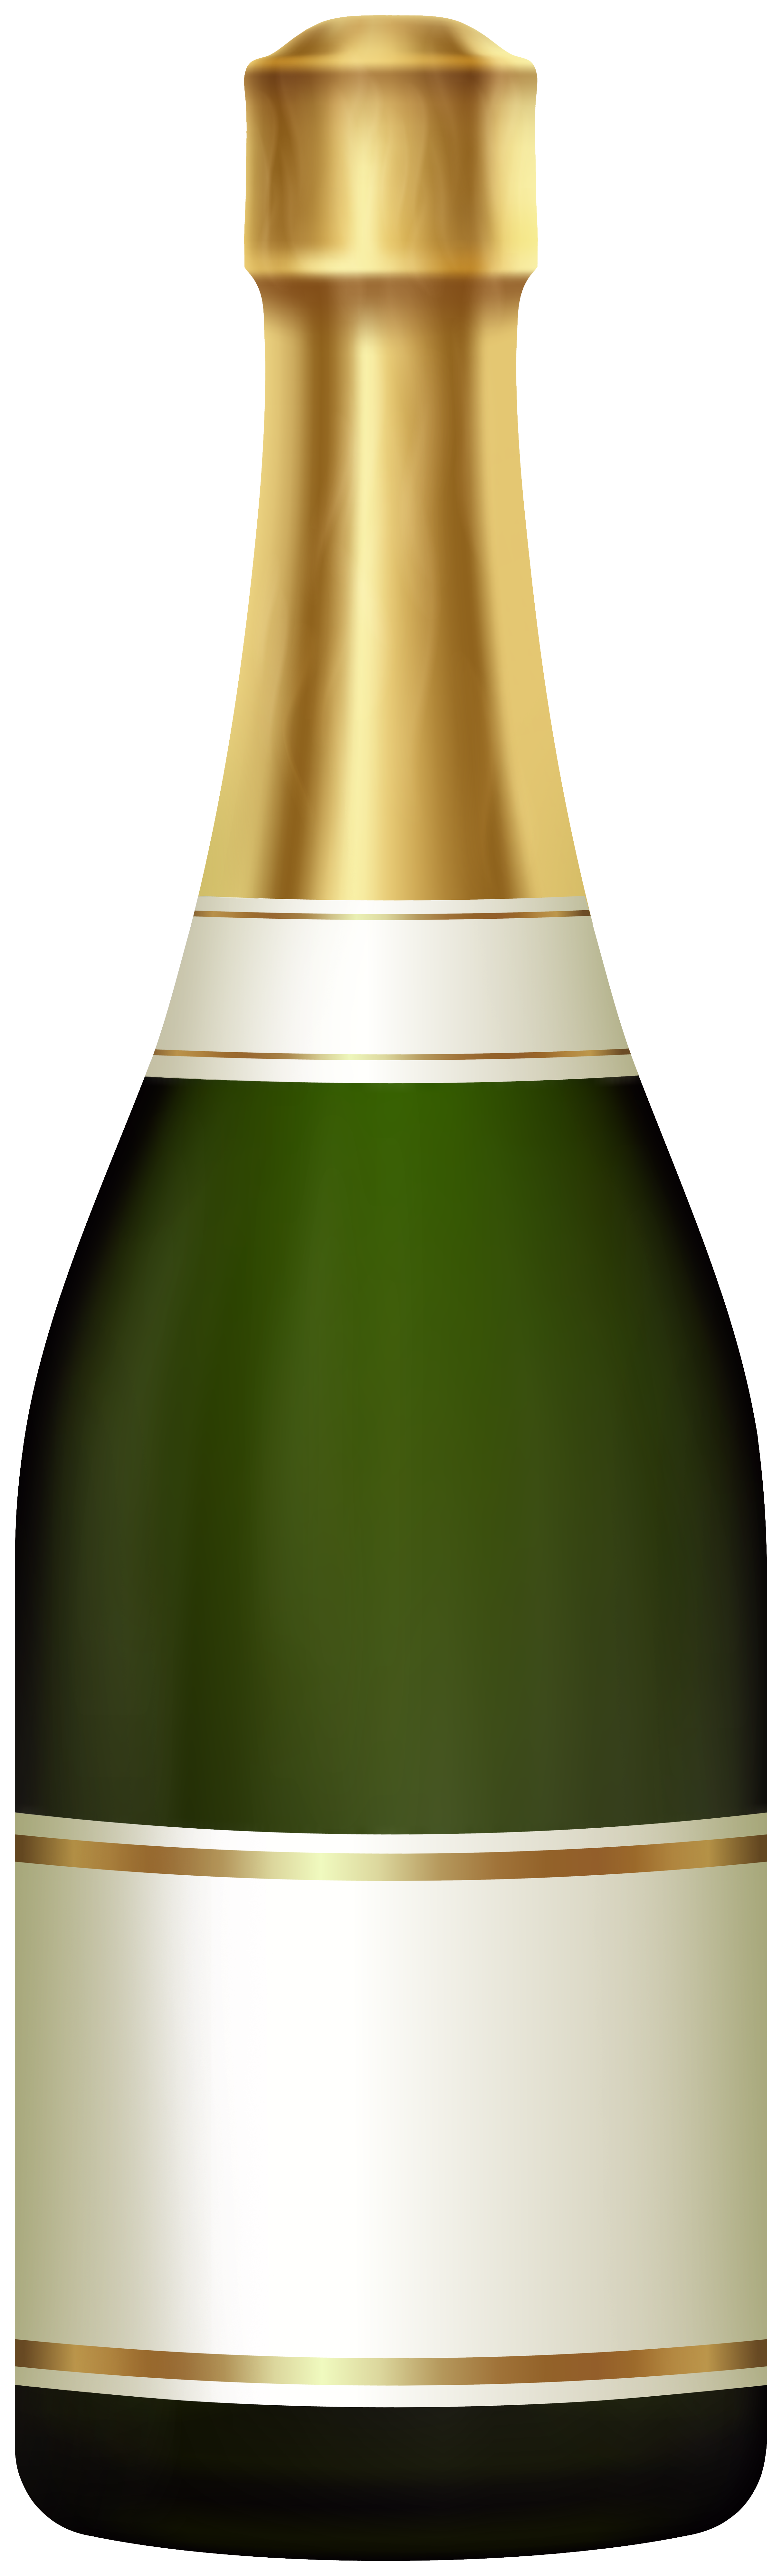 Champagne bottle PNG image with transparent background